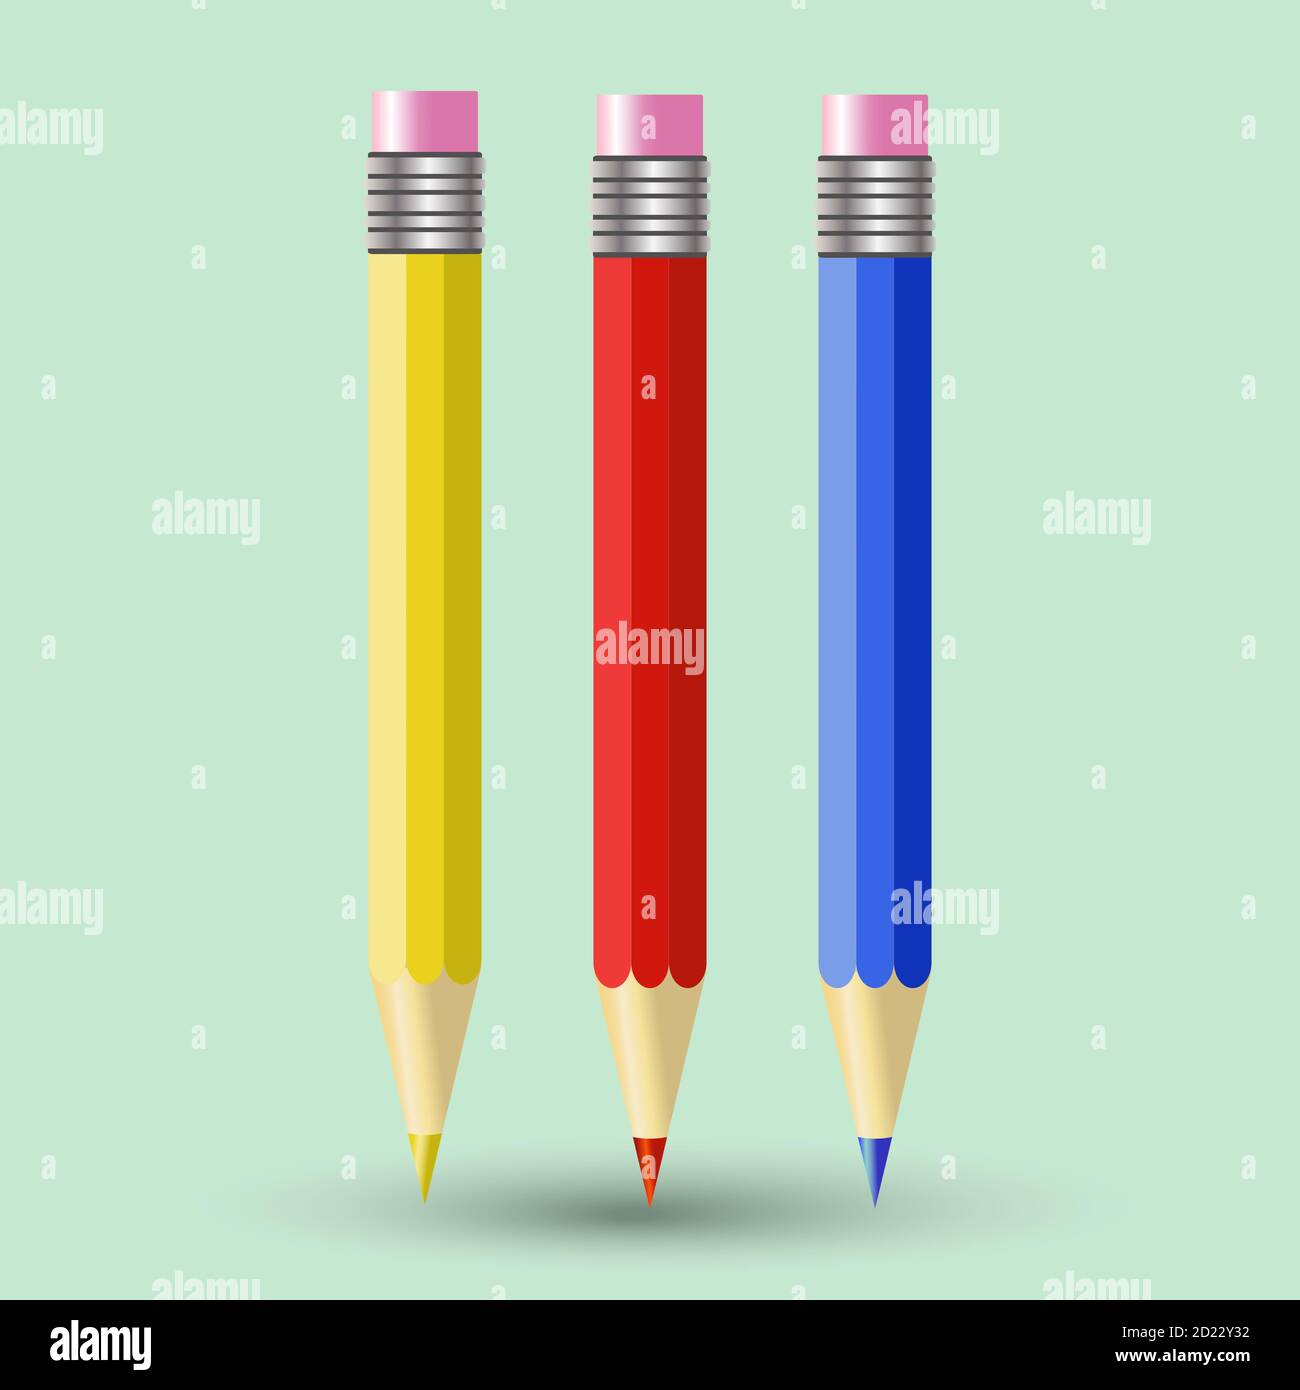 Vector set of three colorful pencils - red, blue, and yellow colors, with a rubber band on top. Isolated on a light green background. Pencils icon Stock Vector